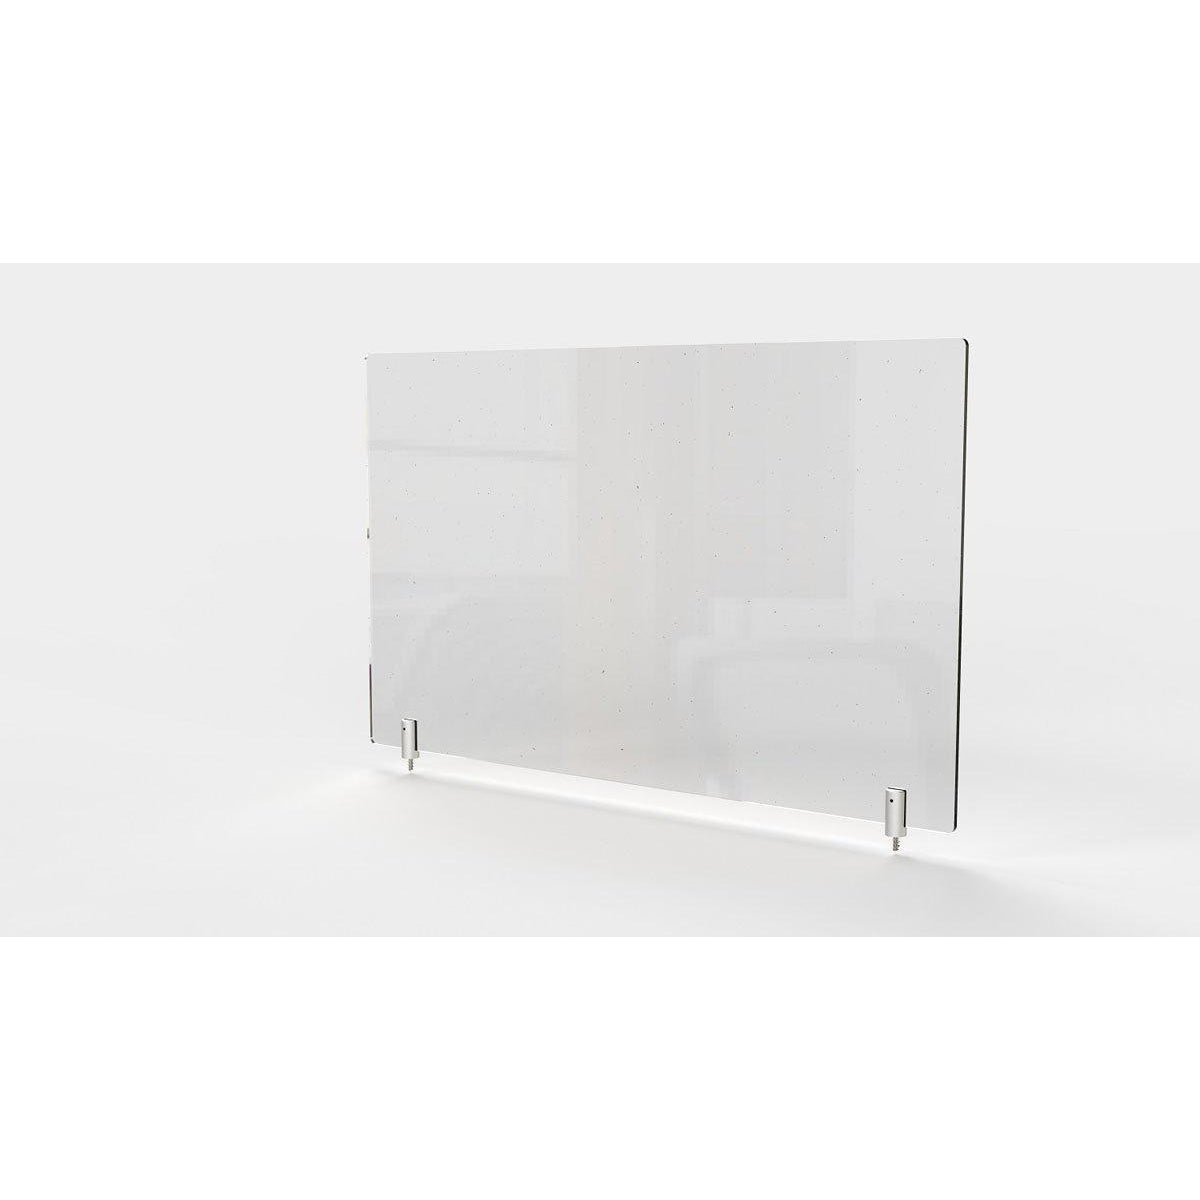 Clear Thermoplastic Partition & Cubicle Extender with Permanent Screw Attachment, 30"H x 24"W